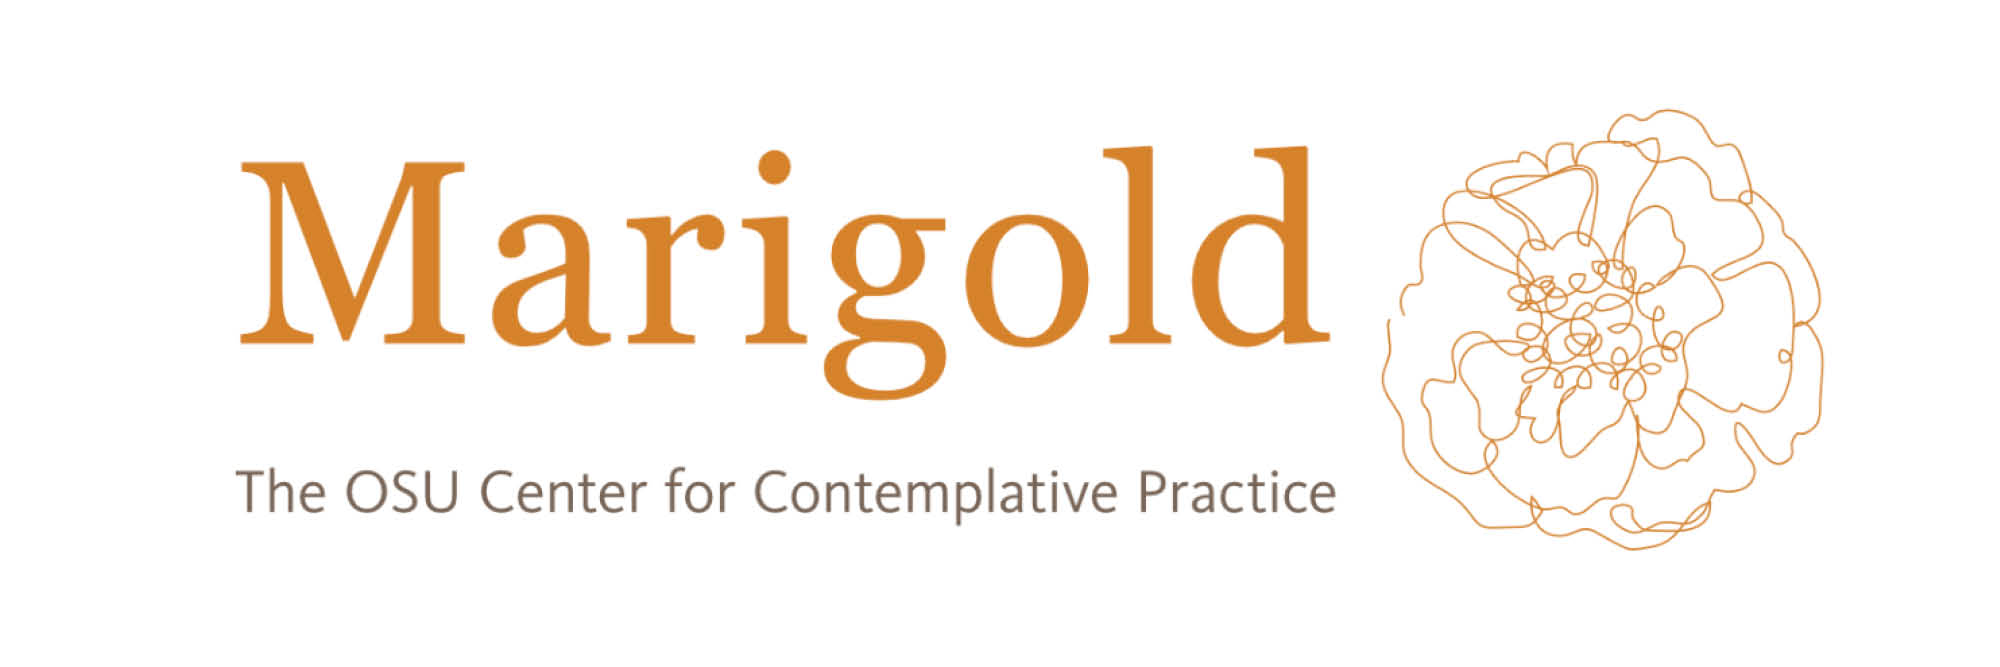 Marigold: The OSU Center for Contemplative Practice text with a line drawing of a marigold flower